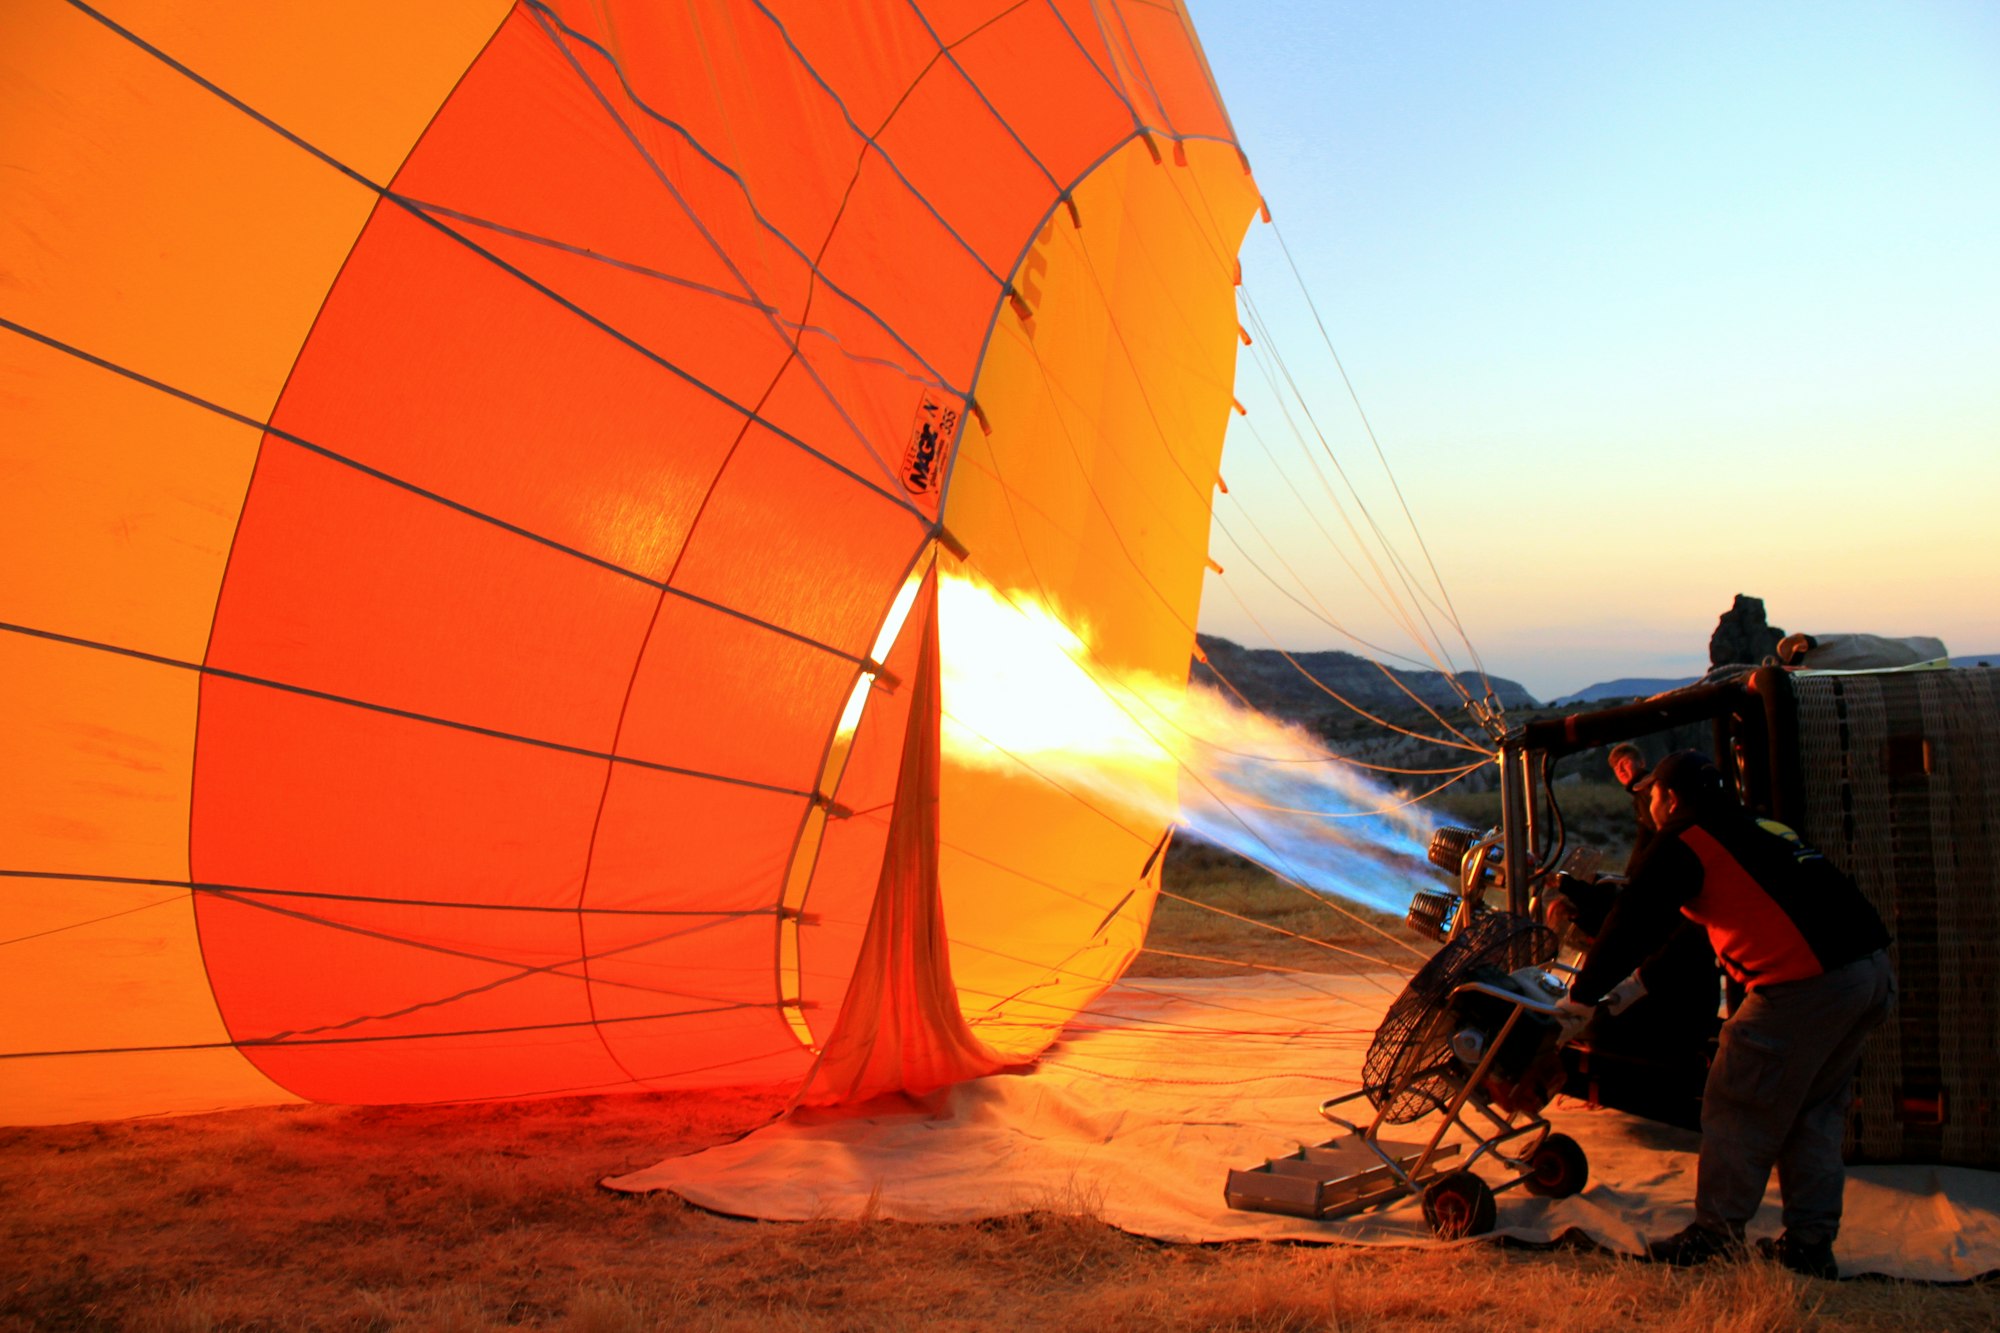 The pilot is preparing its balloon to take off.